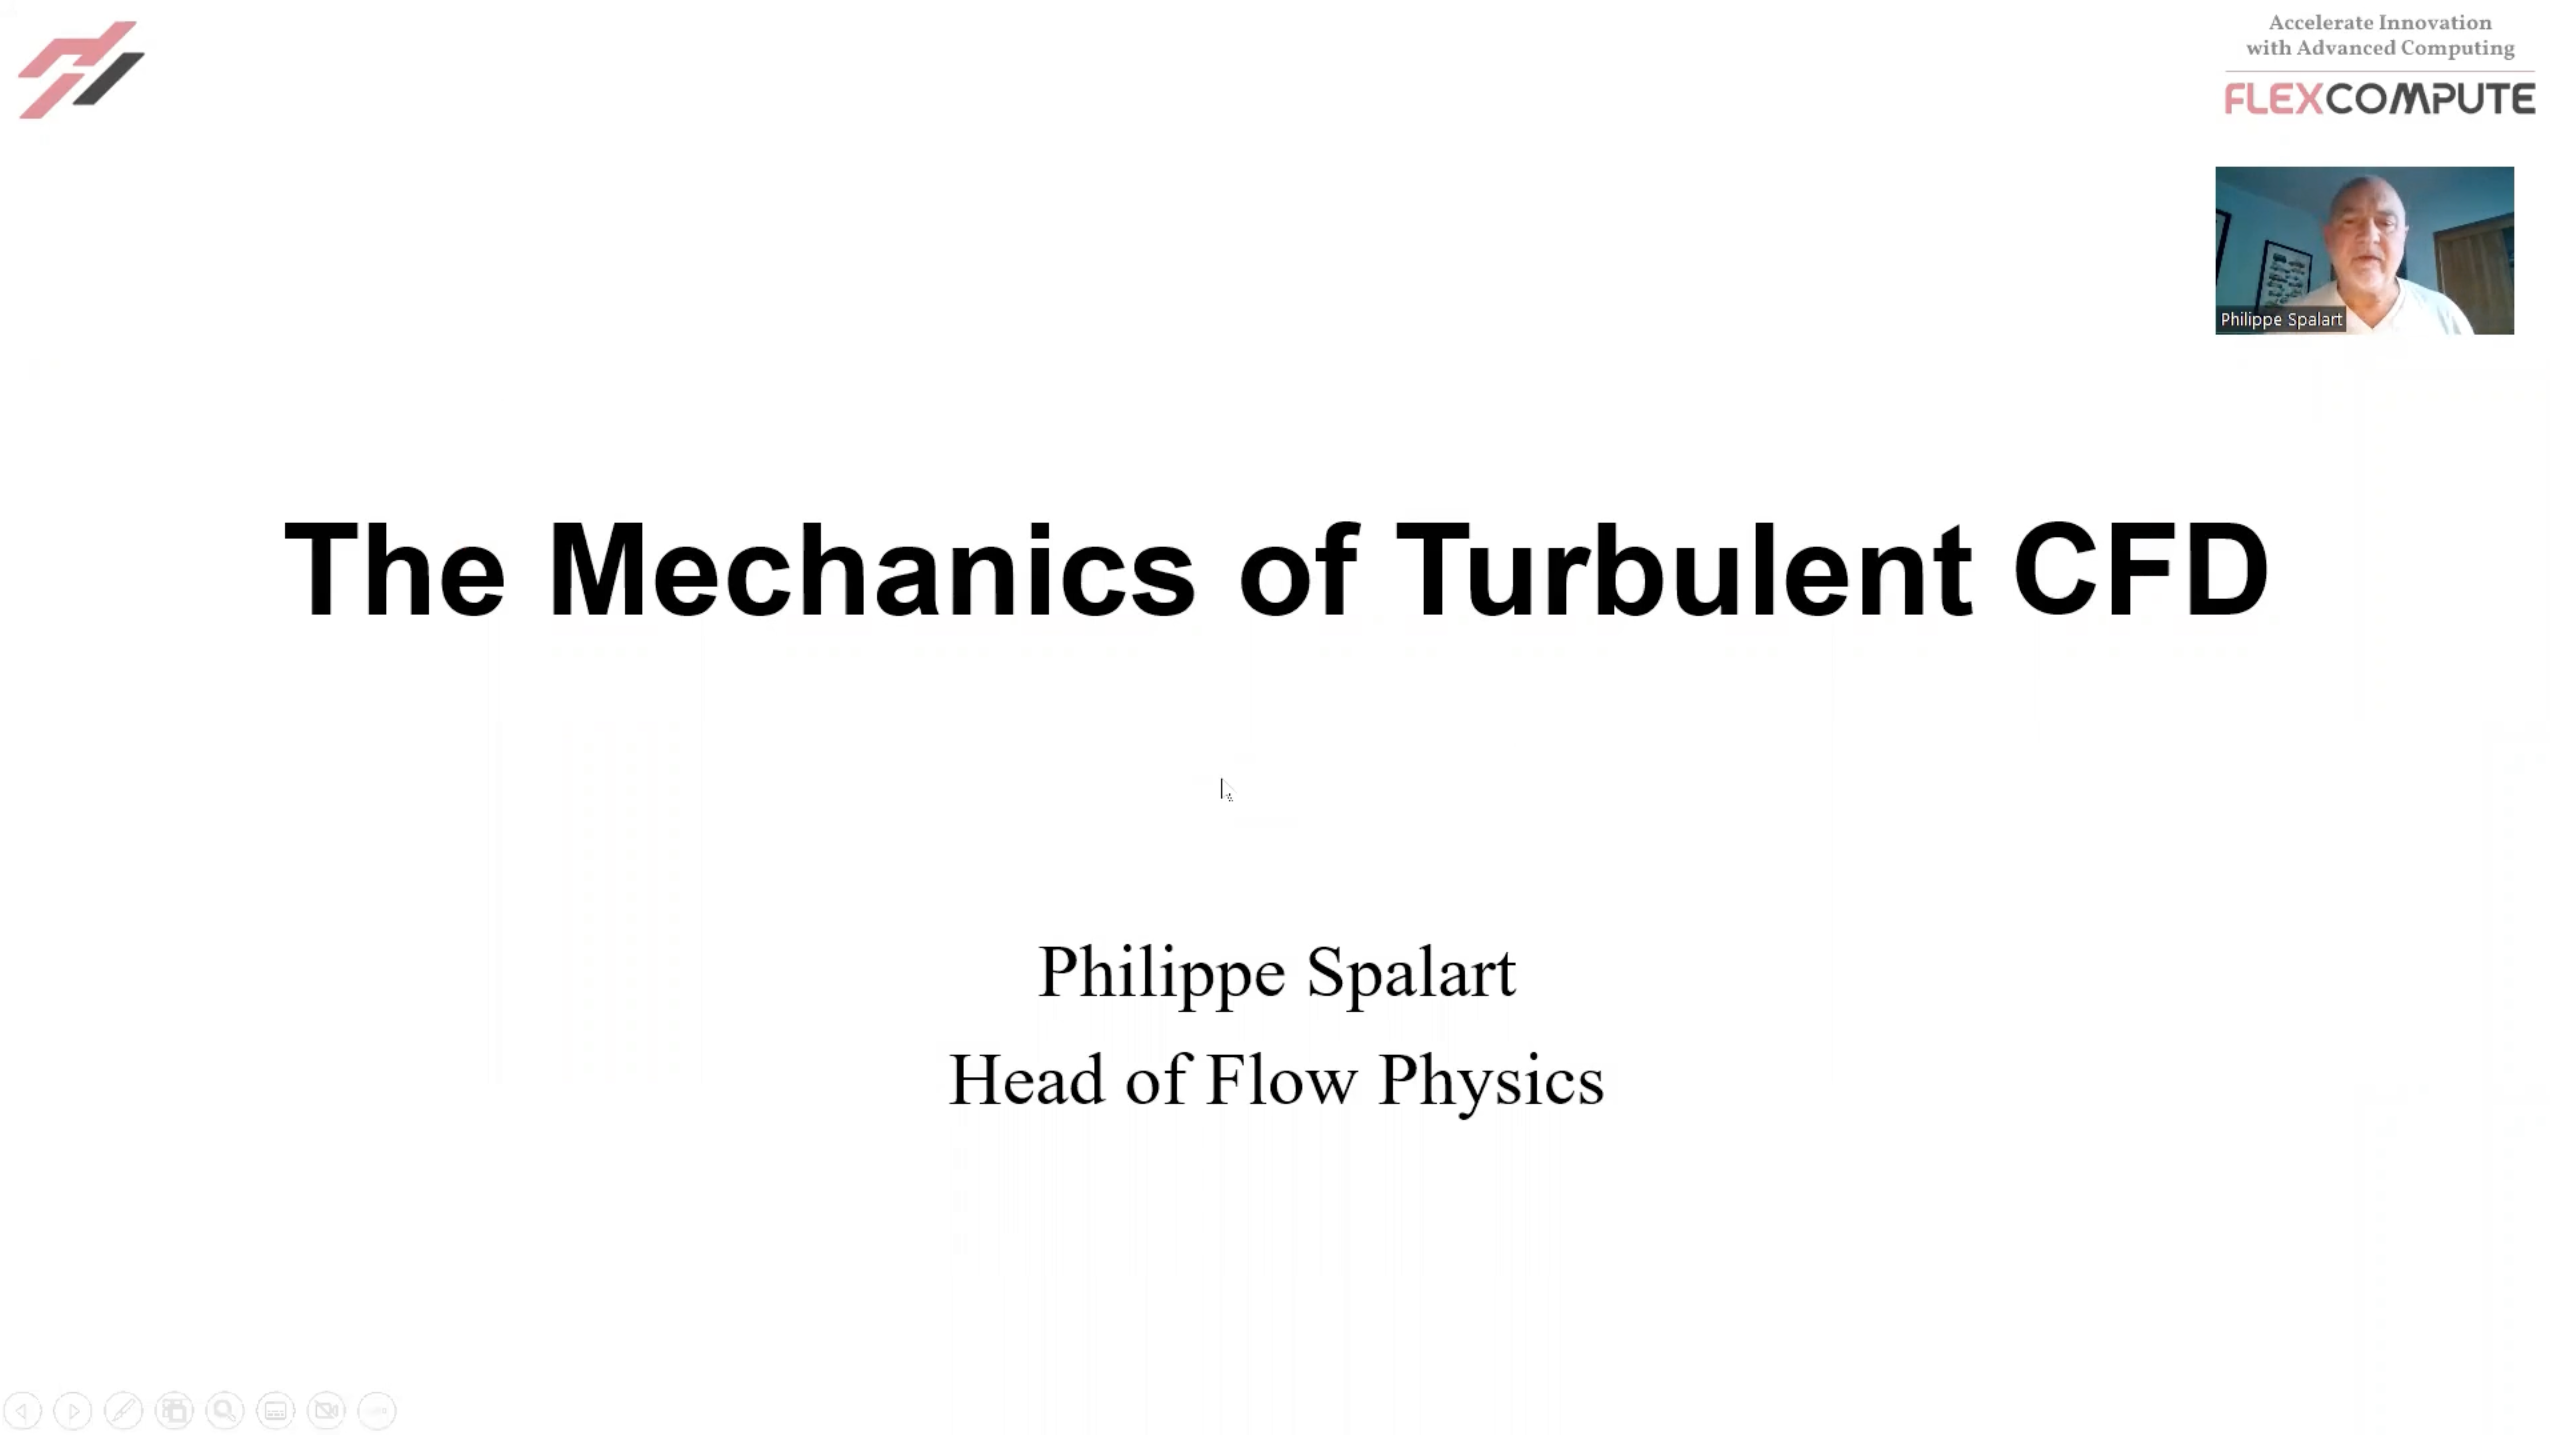 Lecture 6: The Mechanics of Turbulent CFD